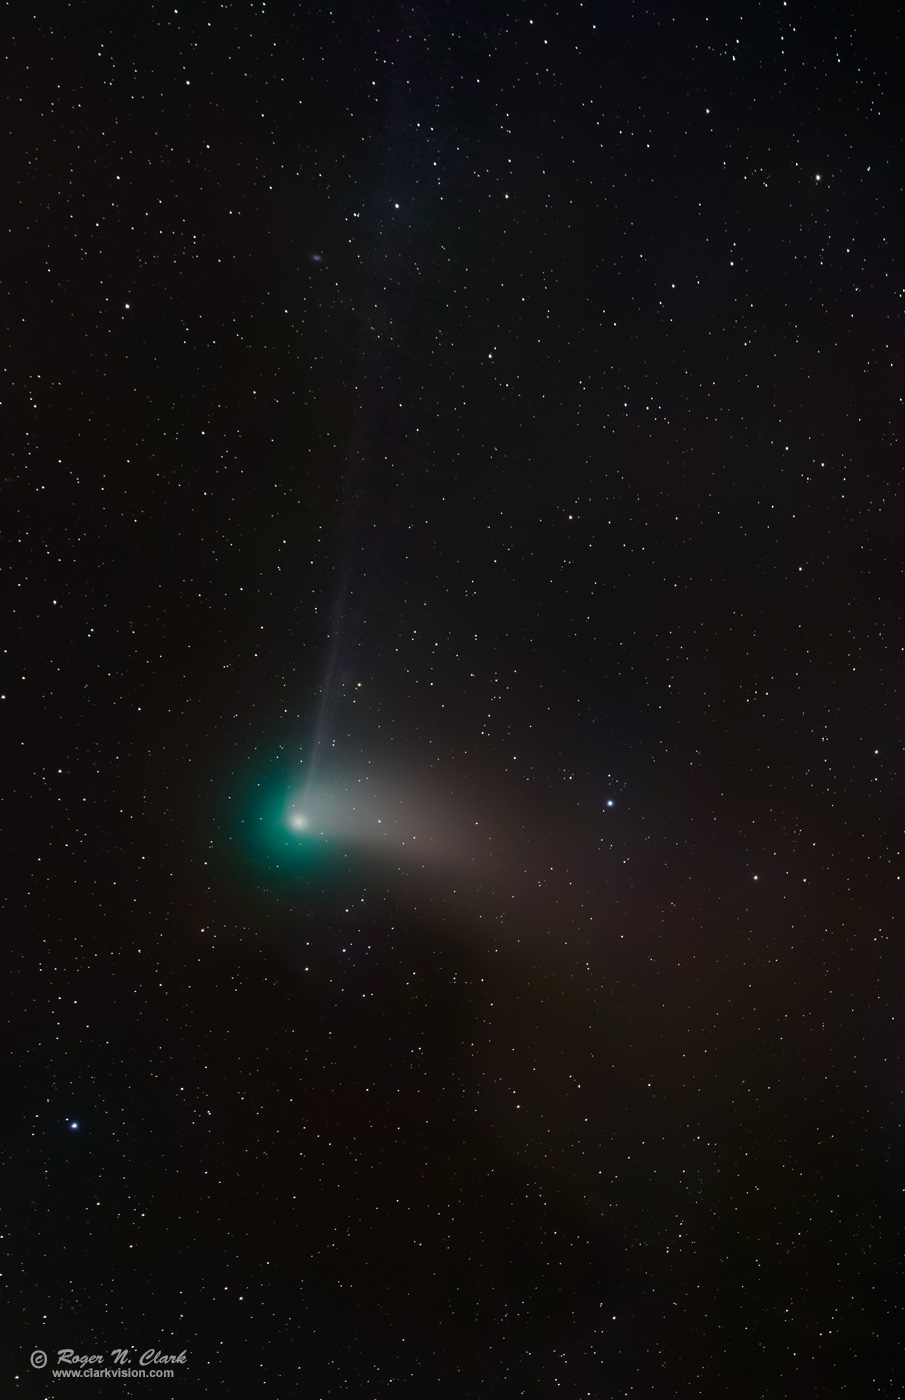 image comet.catalina+stars.c01.18.2016.0J6A6400-52.f-1400vs.jpg is Copyrighted by Roger N. Clark, www.clarkvision.com